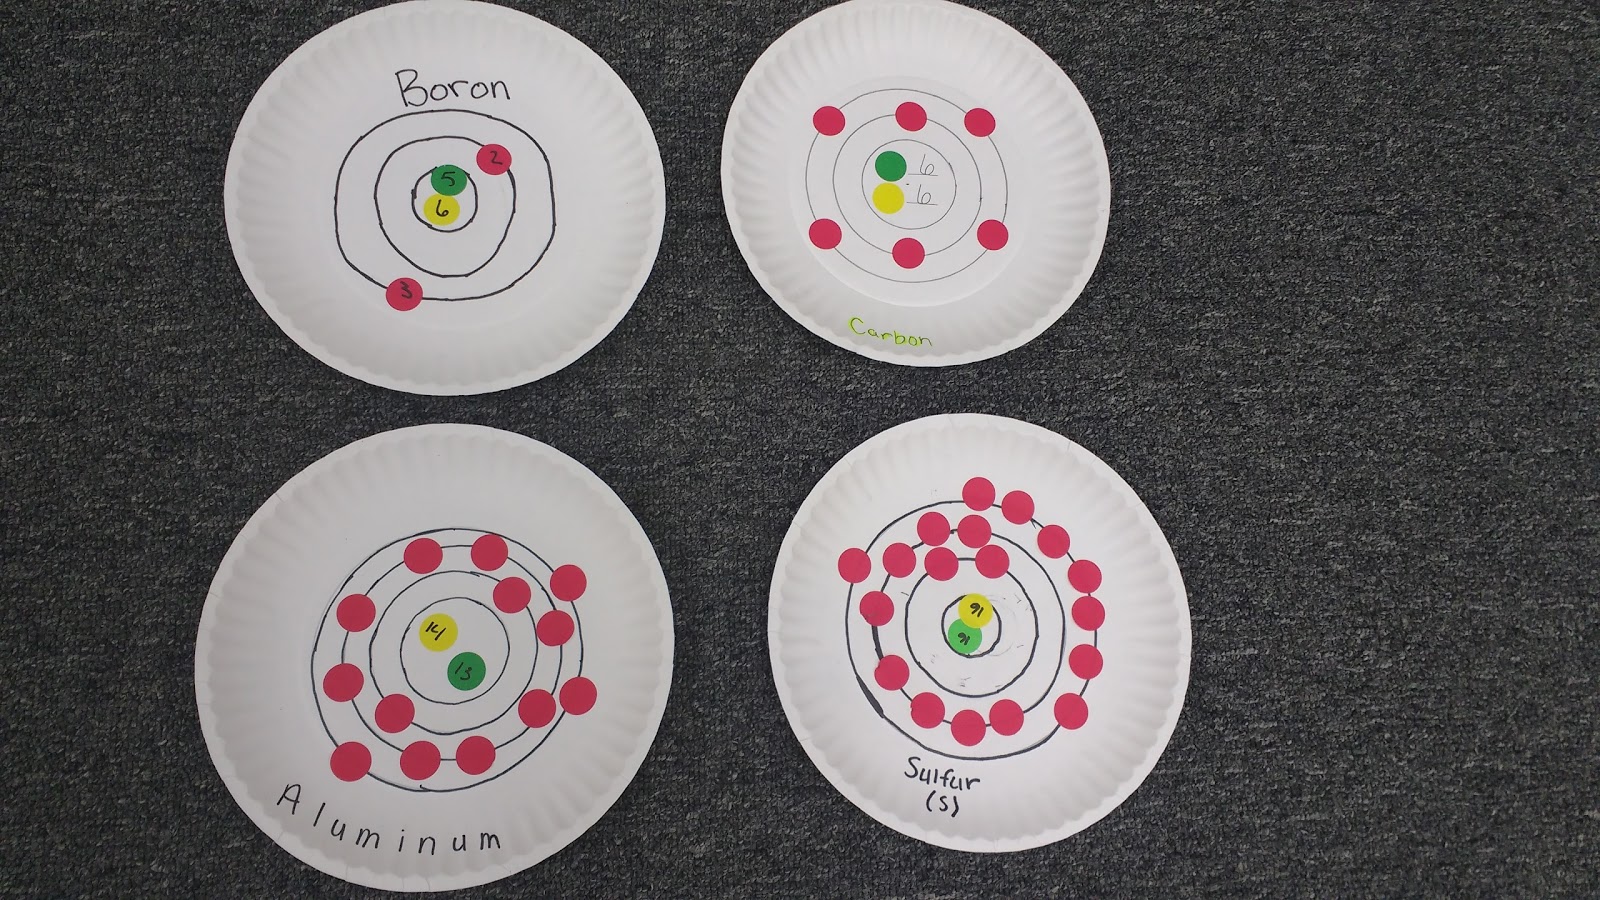 Paper Plate Bohr Models Project for Chemistry or Physical Science